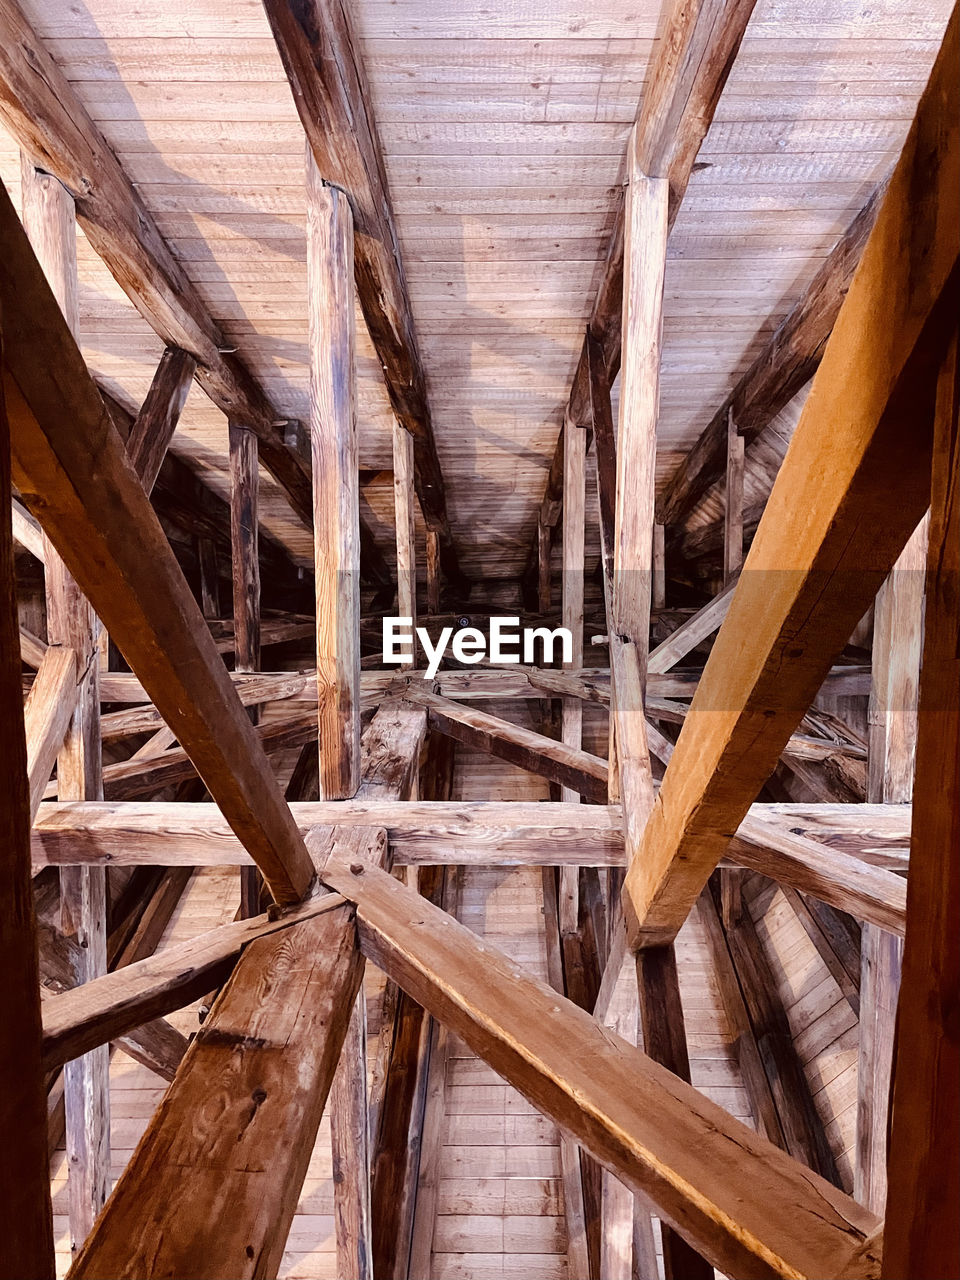 wood, beam, architecture, no people, built structure, lumber, barn, indoors, room, day, attic, nature, pattern, carpenter, roof